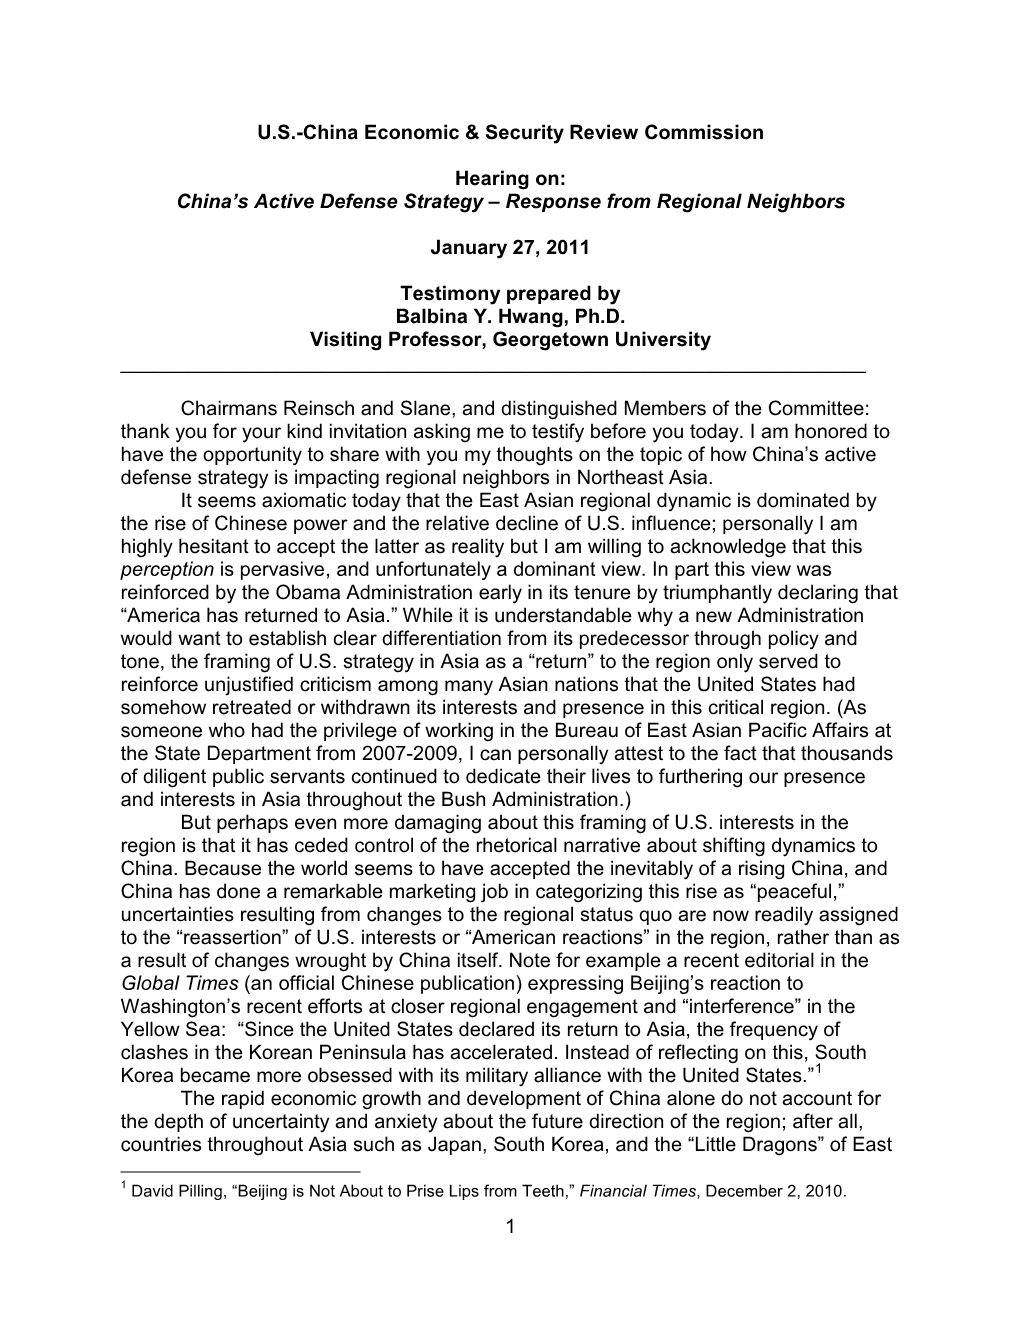 1 U.S.-China Economic & Security Review Commission Hearing On